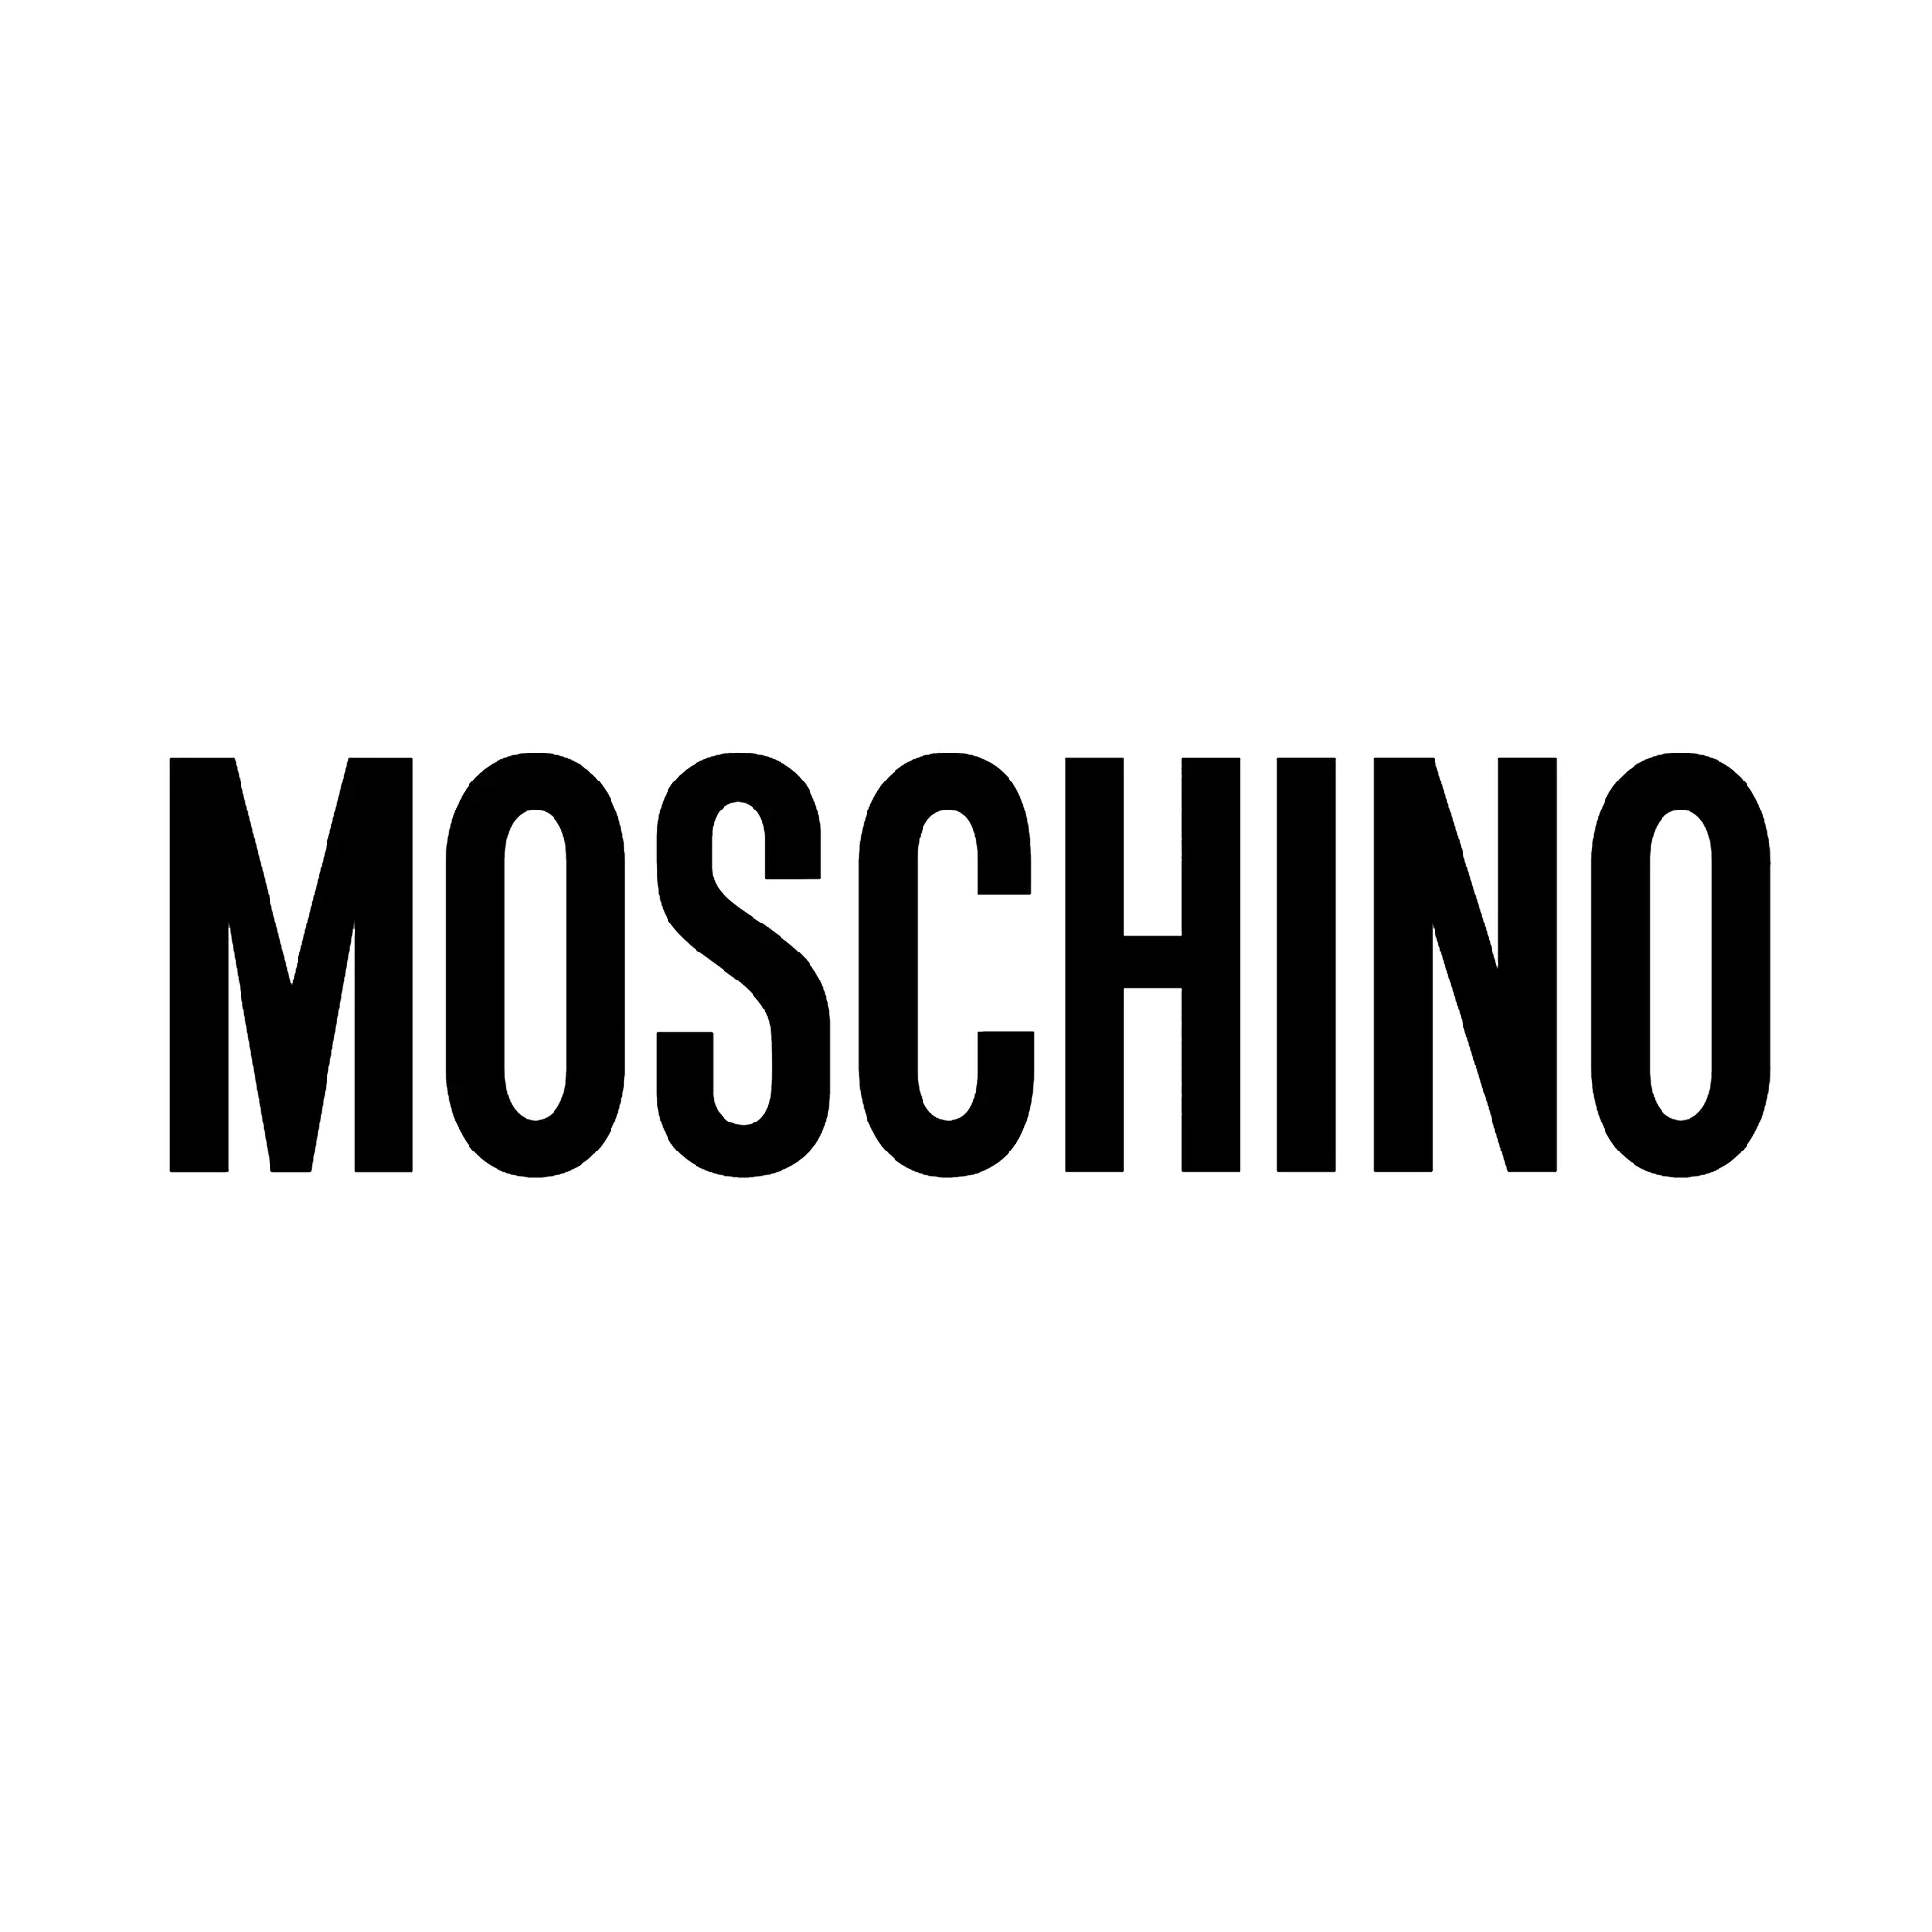 Moschino Pink Fresh Couture EDT | Femme Fatale - Femme Fatale - 